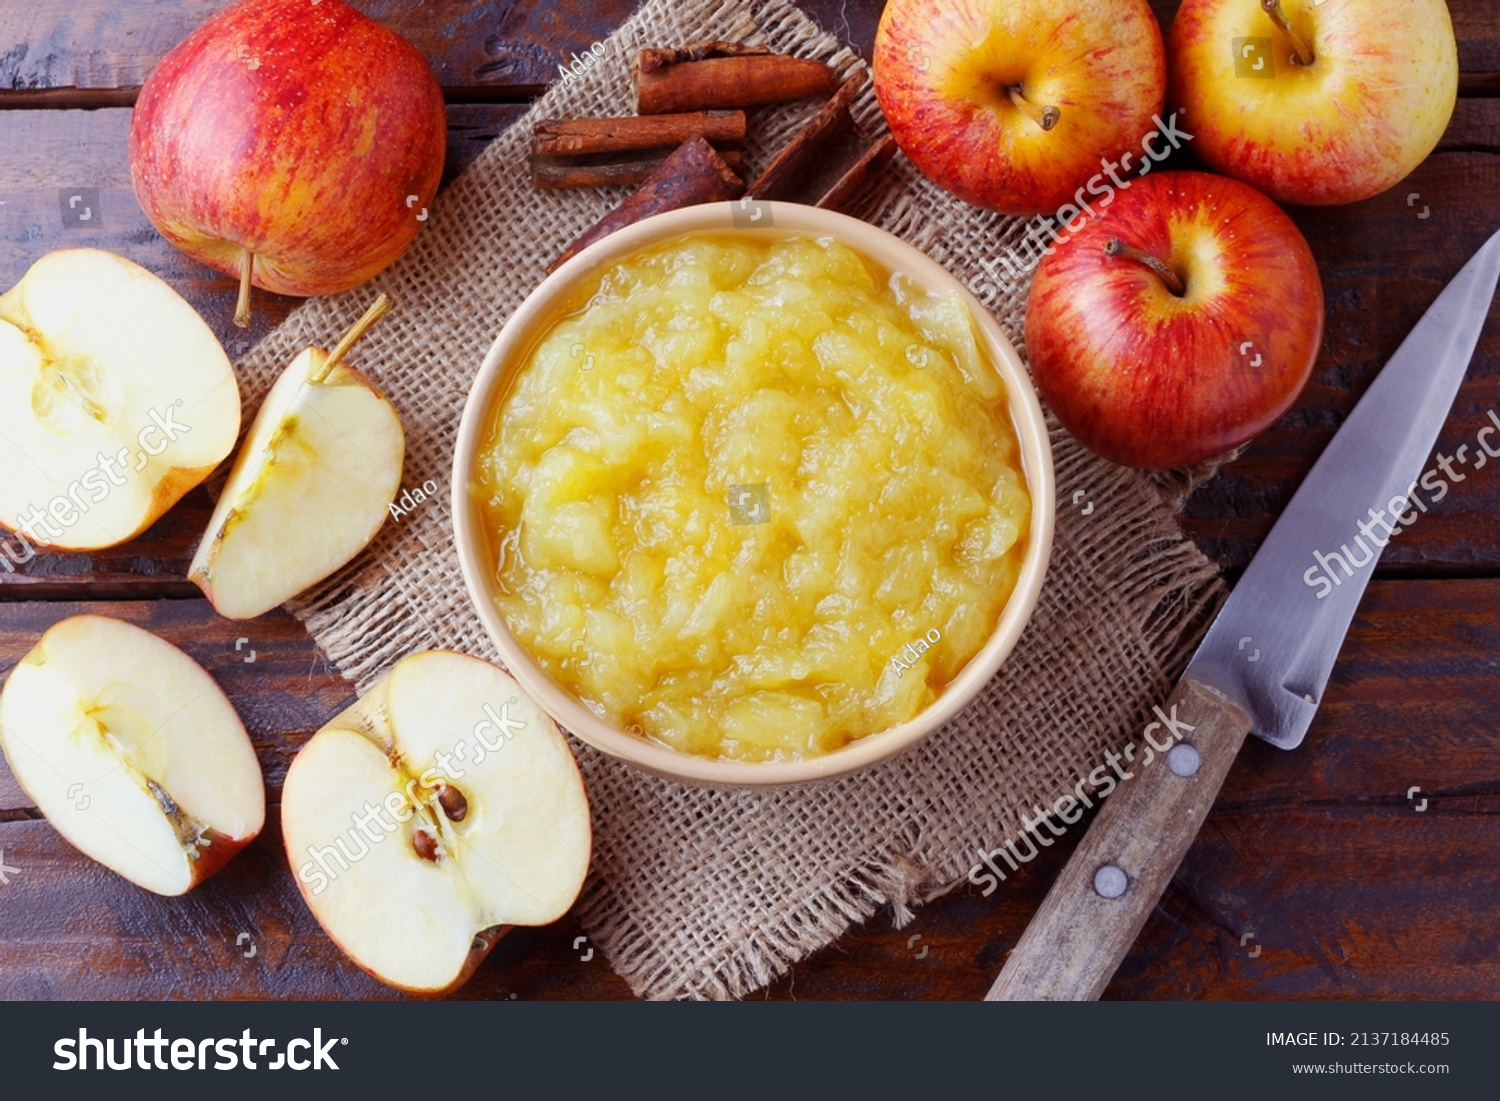 homemade apple sauce or apple puree in ceramic bowl over rustic wooden table. top view #2137184485